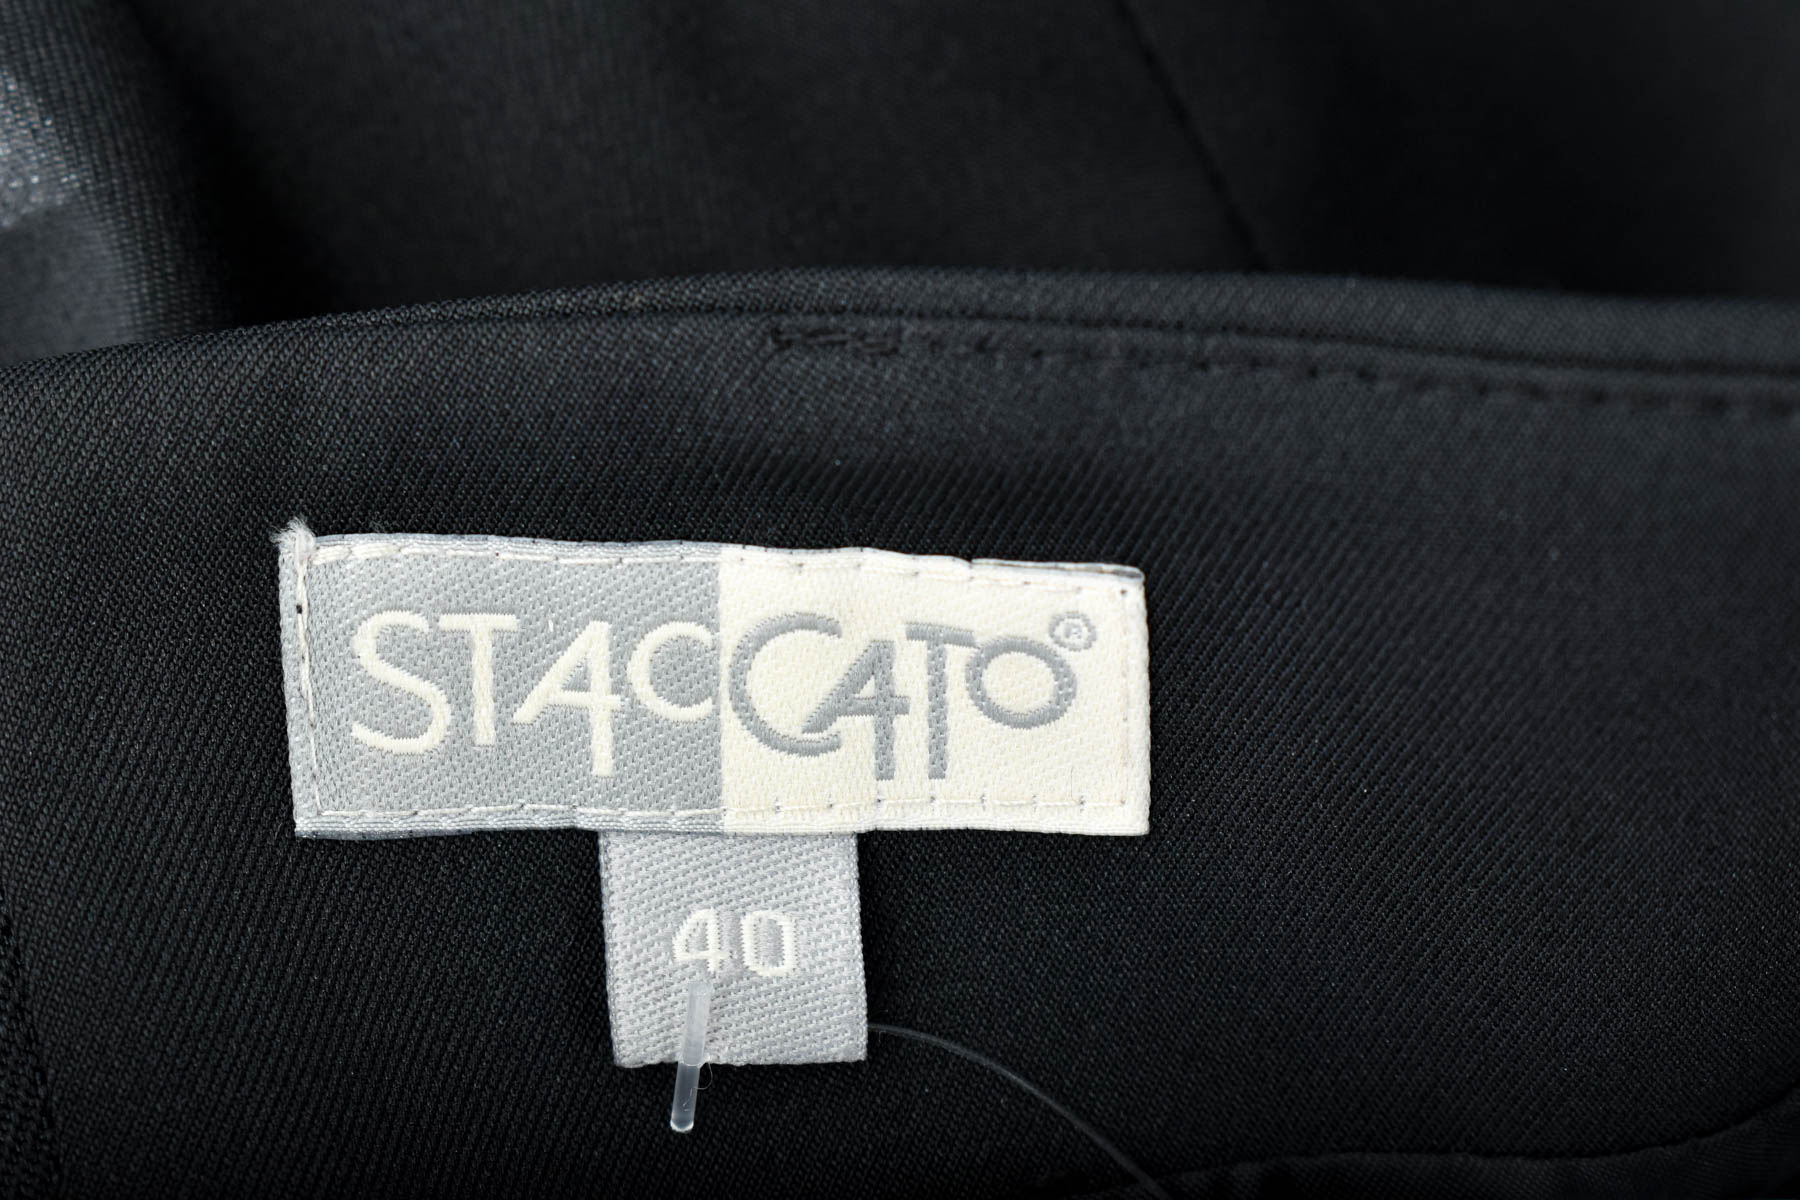 Dress - Staccato - 2